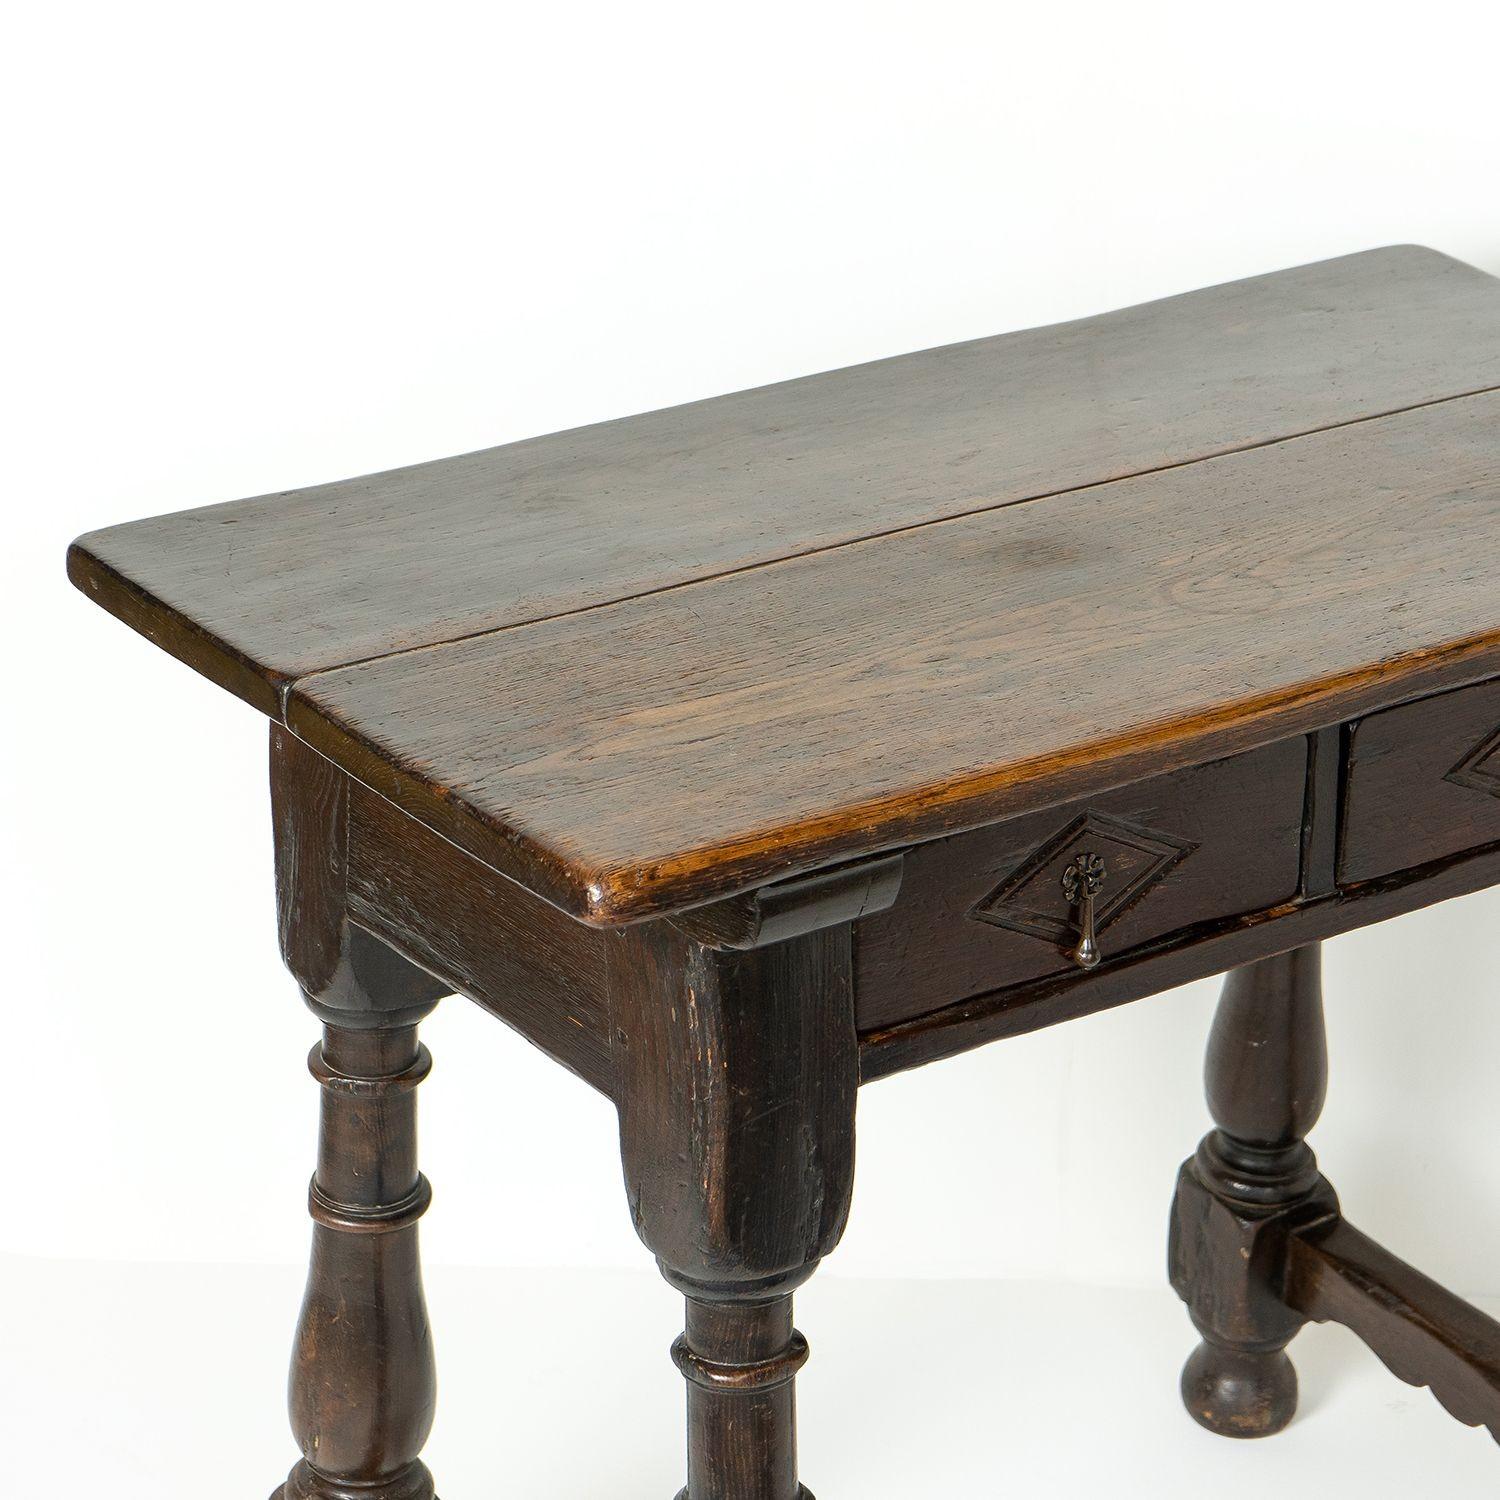 Antique Chunky Spanish Baroque Oak Side Table with Baluster Legs, 17th Century For Sale 4